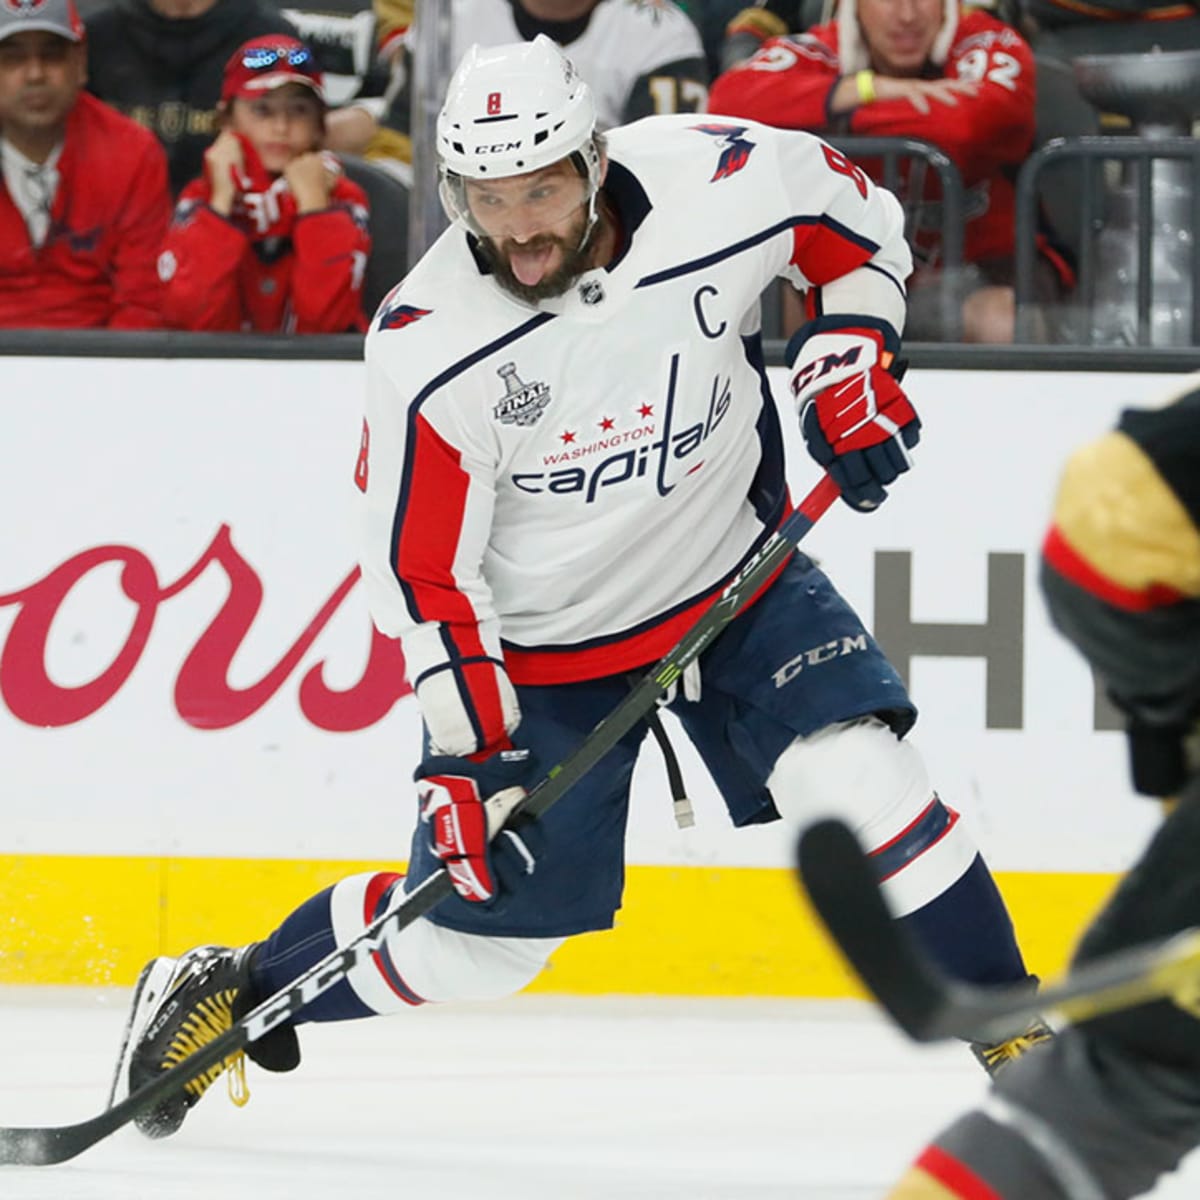 Alexander Ovechkin Washington Capitals Stanley Cup Champions 2018